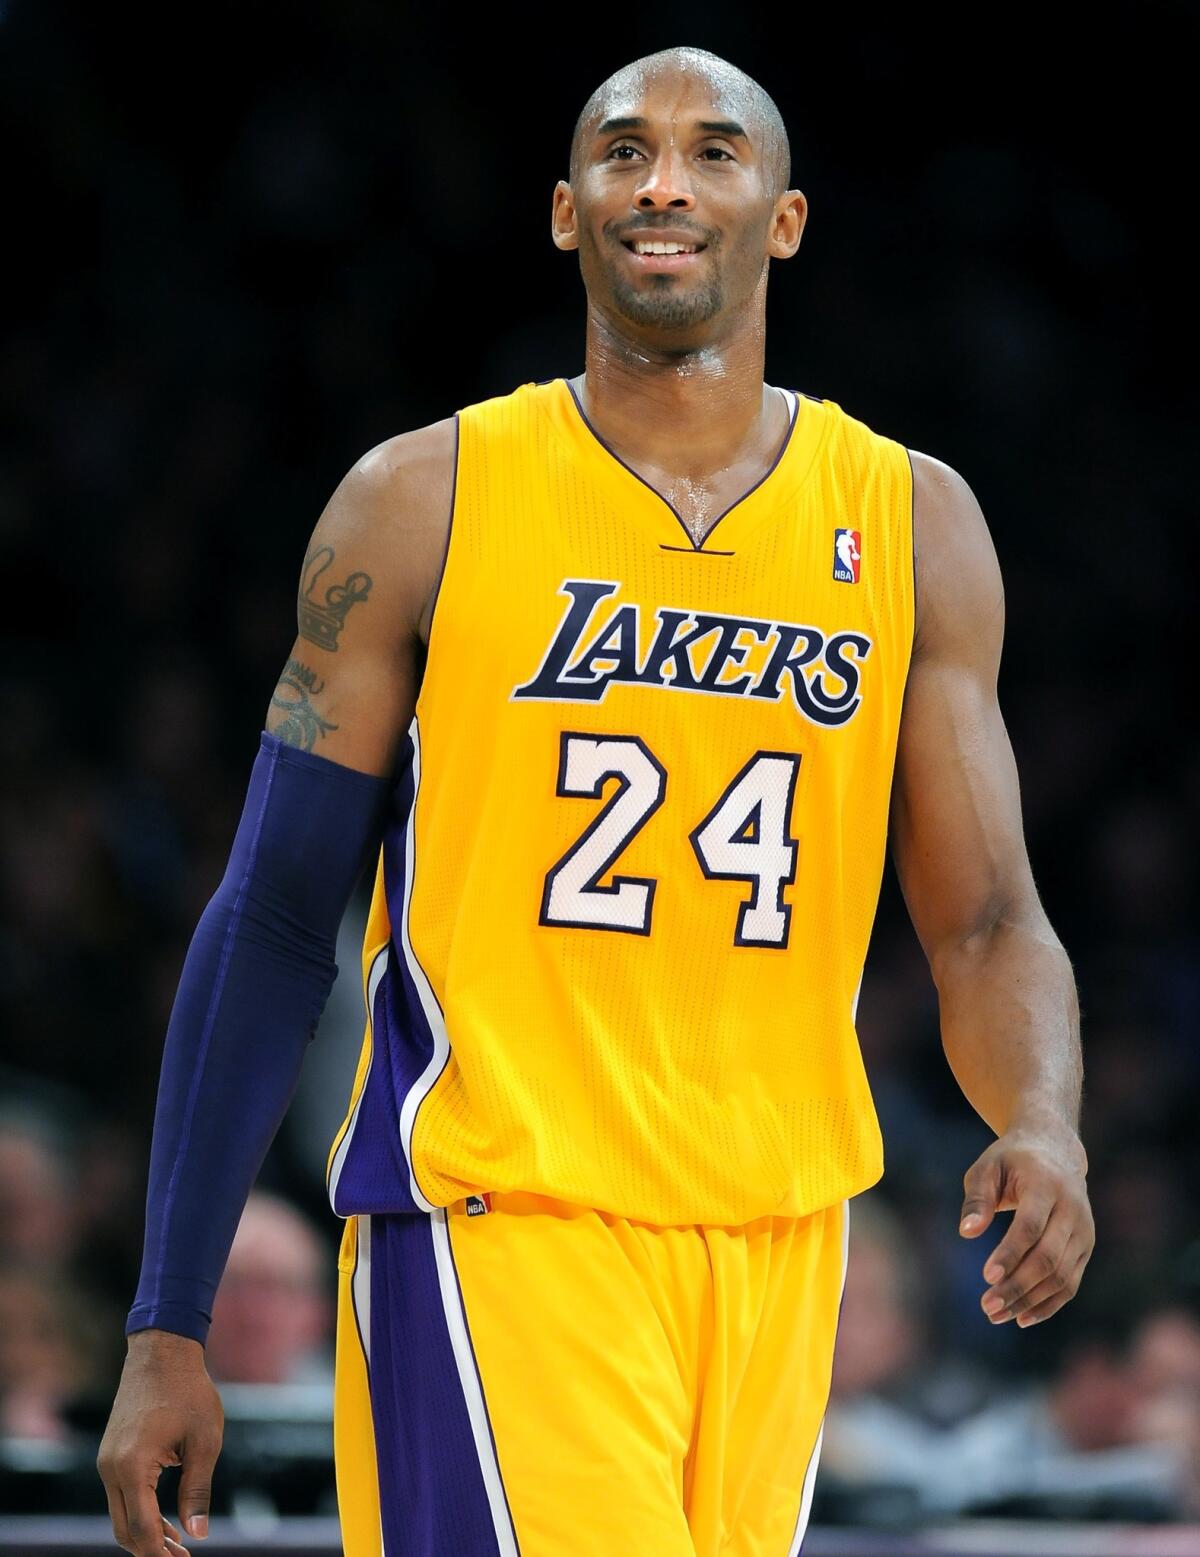 Lakers star Kobe Bryant will make $23.5 million next season and $25 million during the 2015-16 season under the terms of a two-year contract extension he signed Monday.